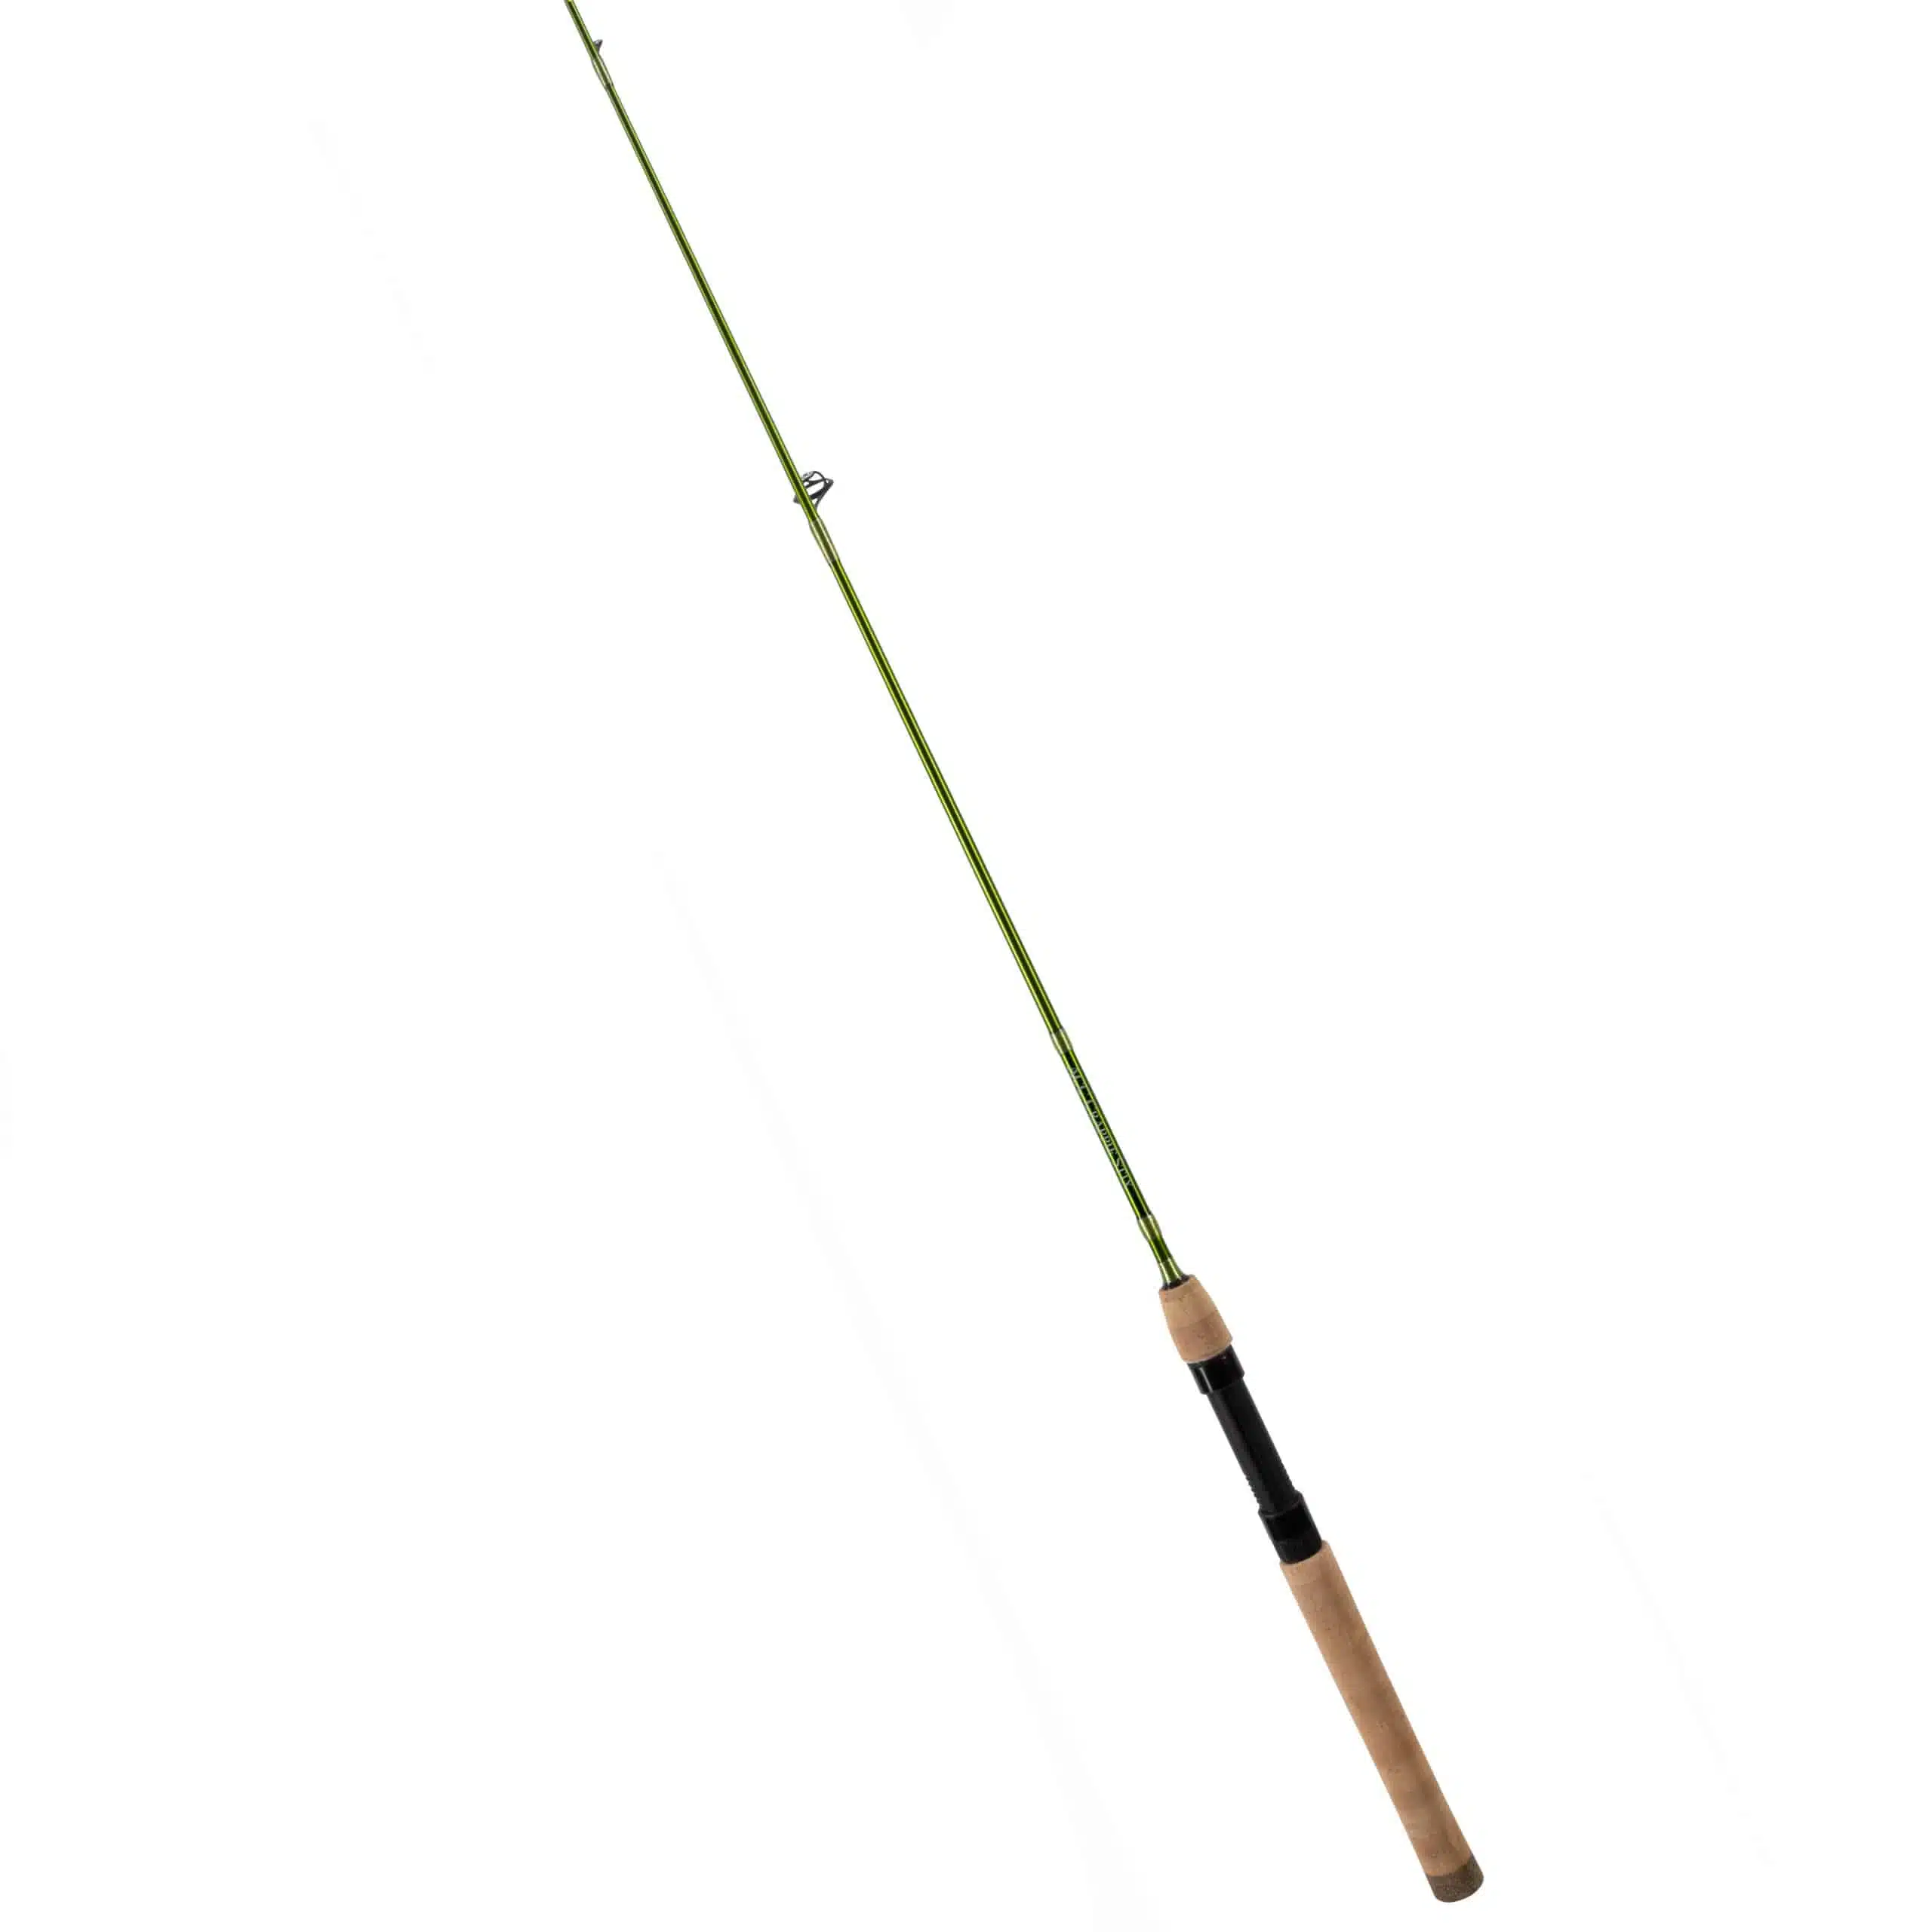 Skeletal Graphite 6.6ft Lews Laser Lite Speed Spin Combo from Fish